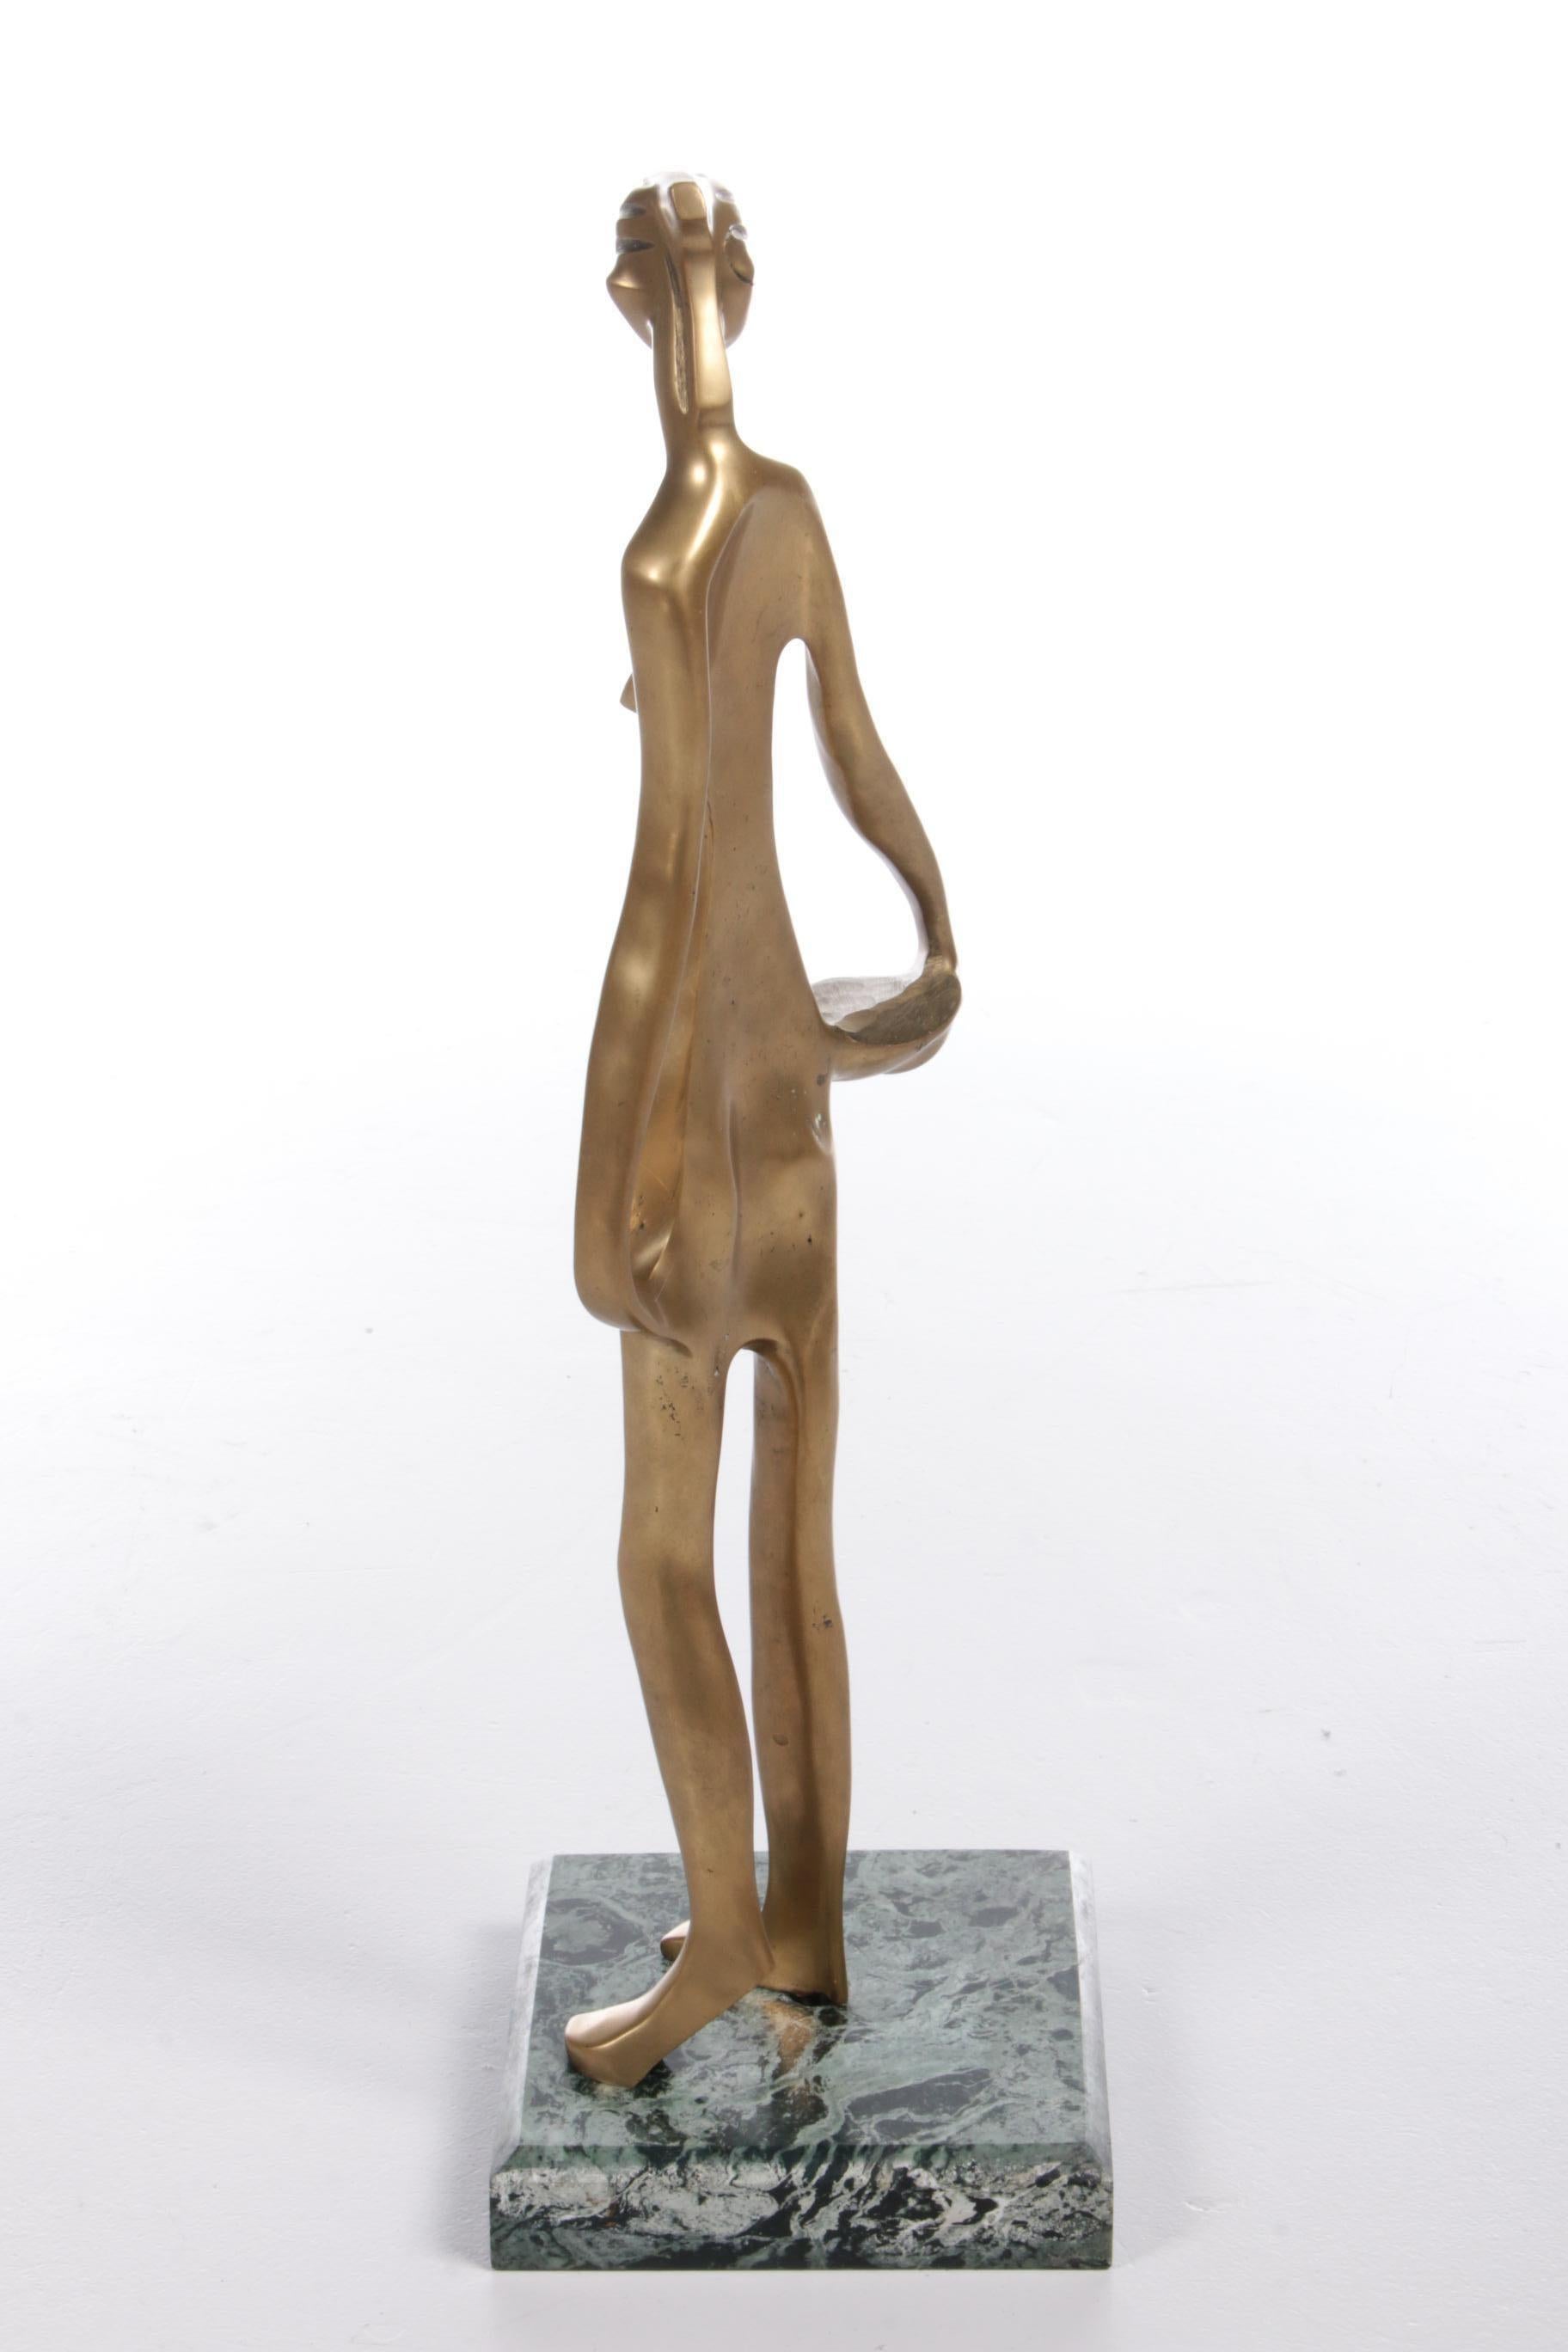 A beautiful statue made of gold-coloured brass. It is a representation of an African female figure.

The statue is made in the style of Franz Hagenauer, who designed many African statues himself and is known for his special works. The style with